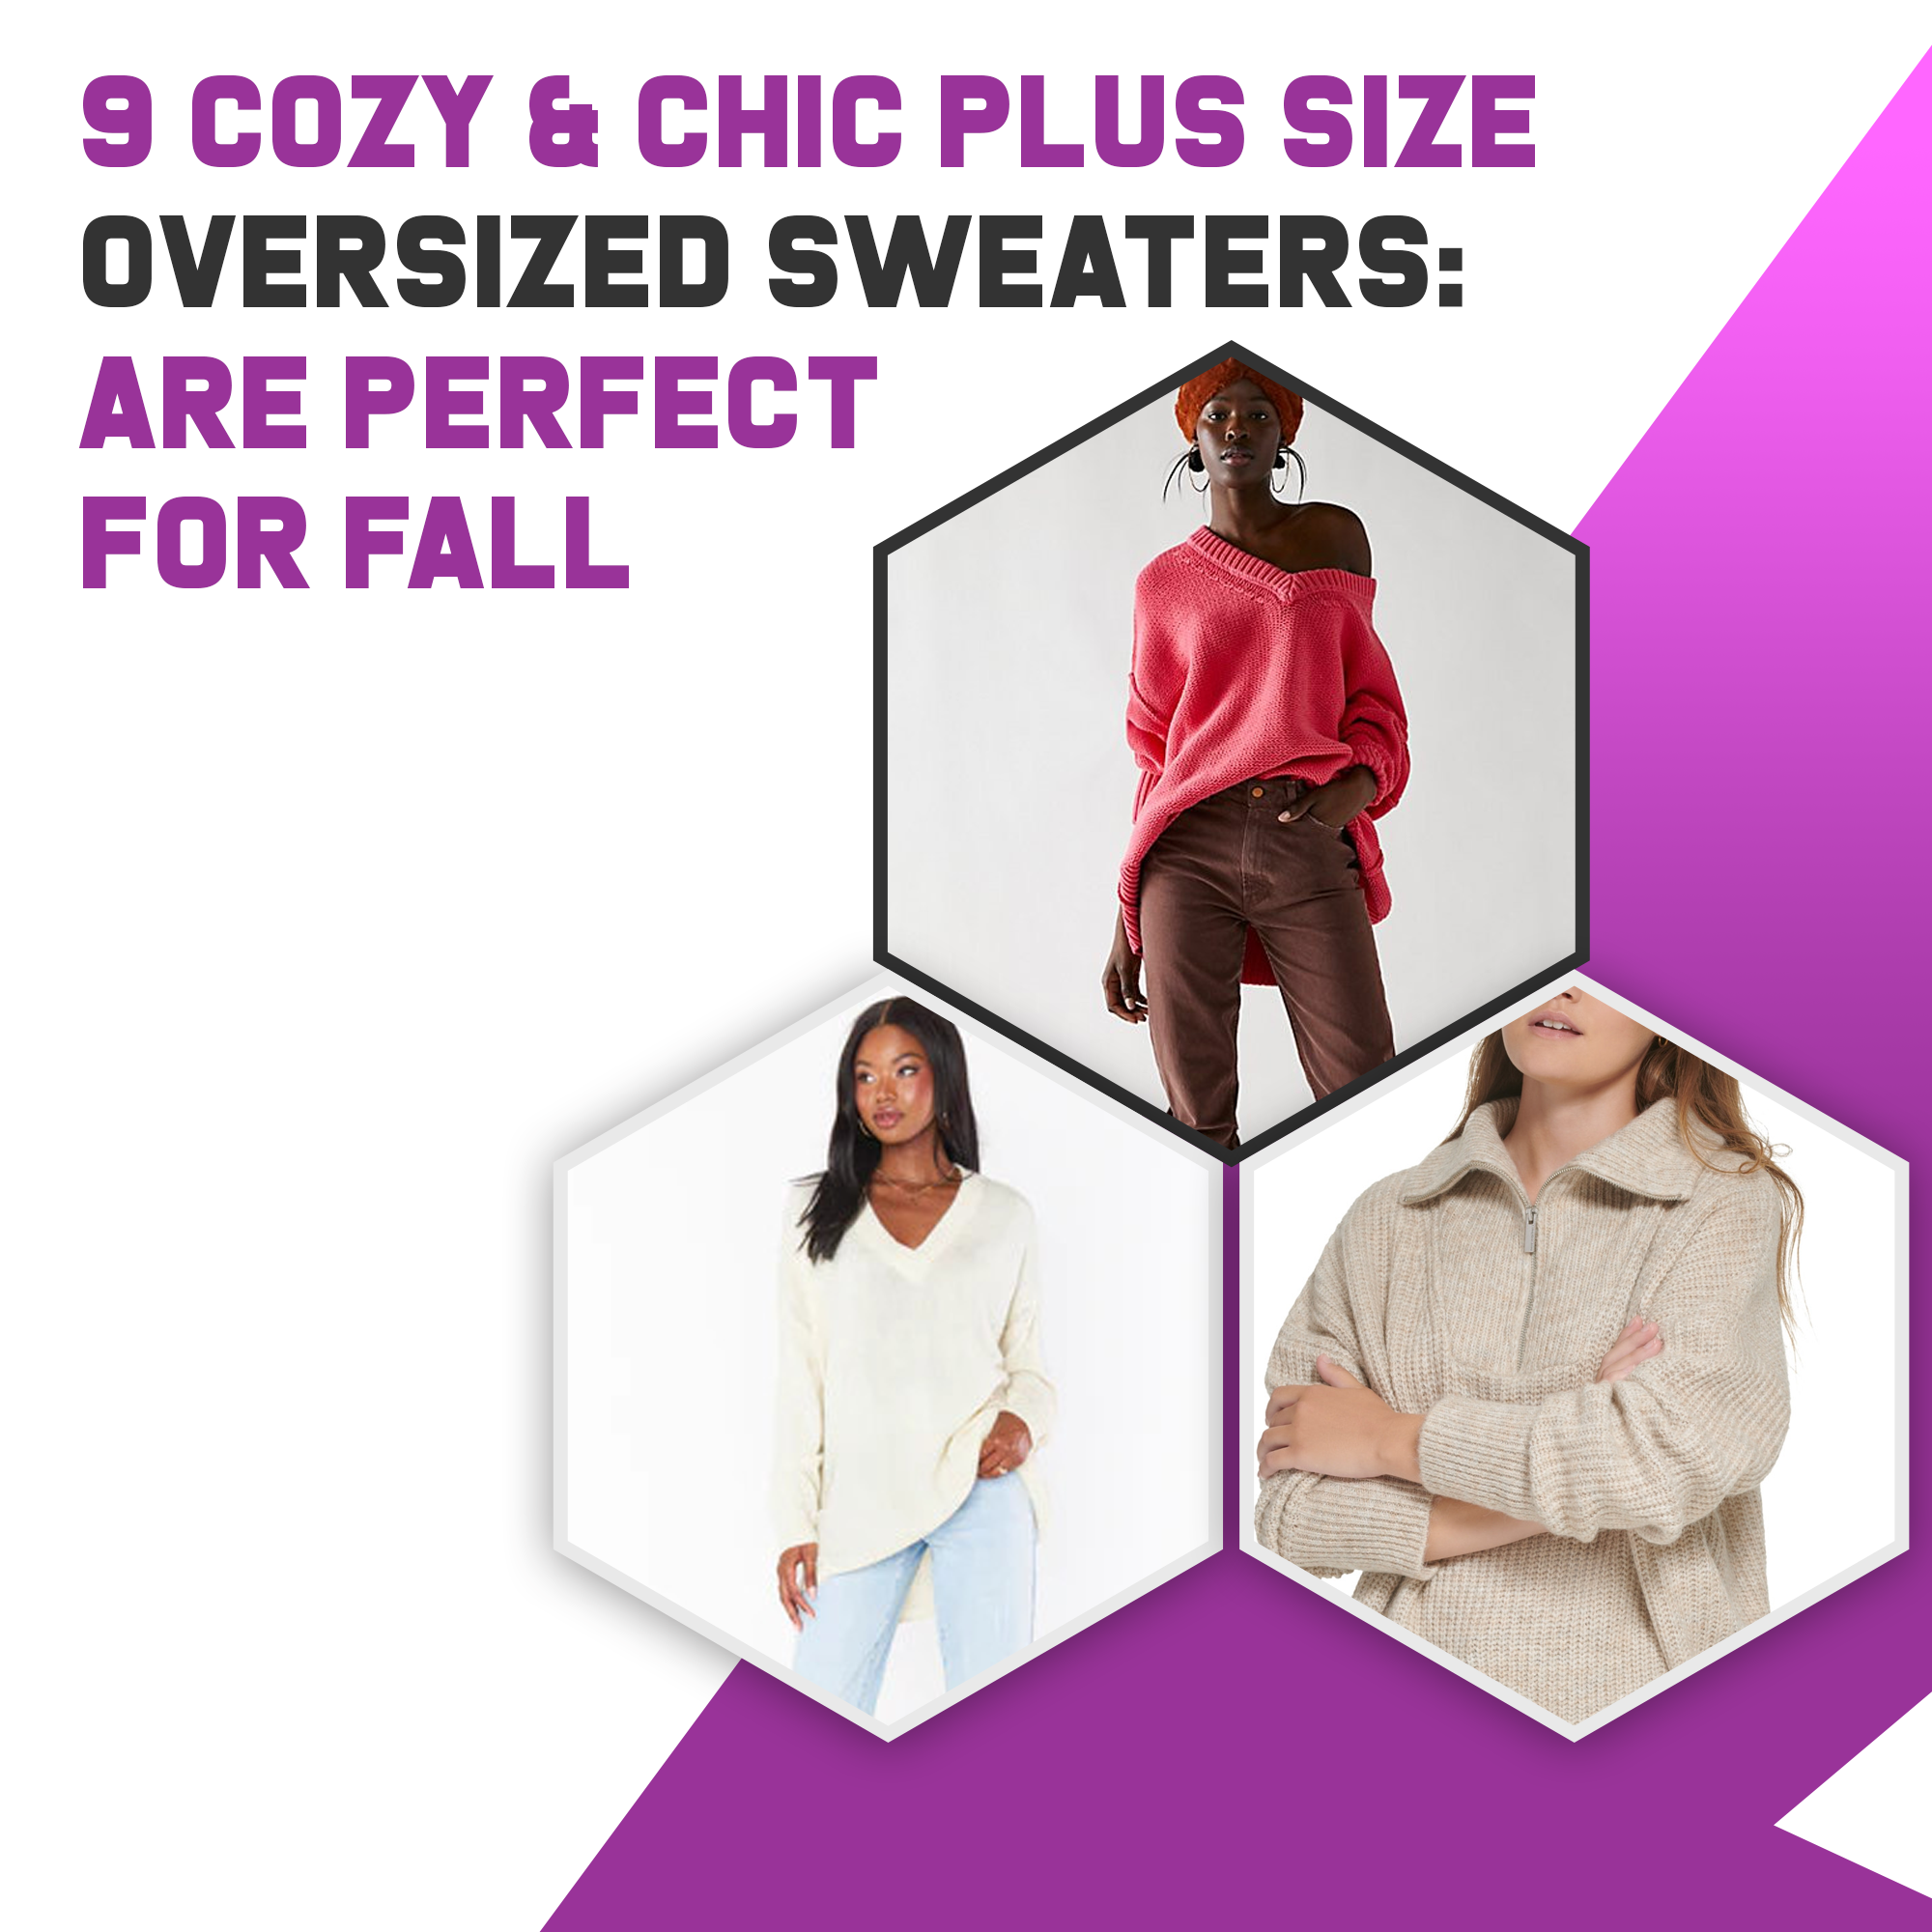 9 Cozy & Chic Plus Size Oversized Sweaters: Are Perfect For Fall